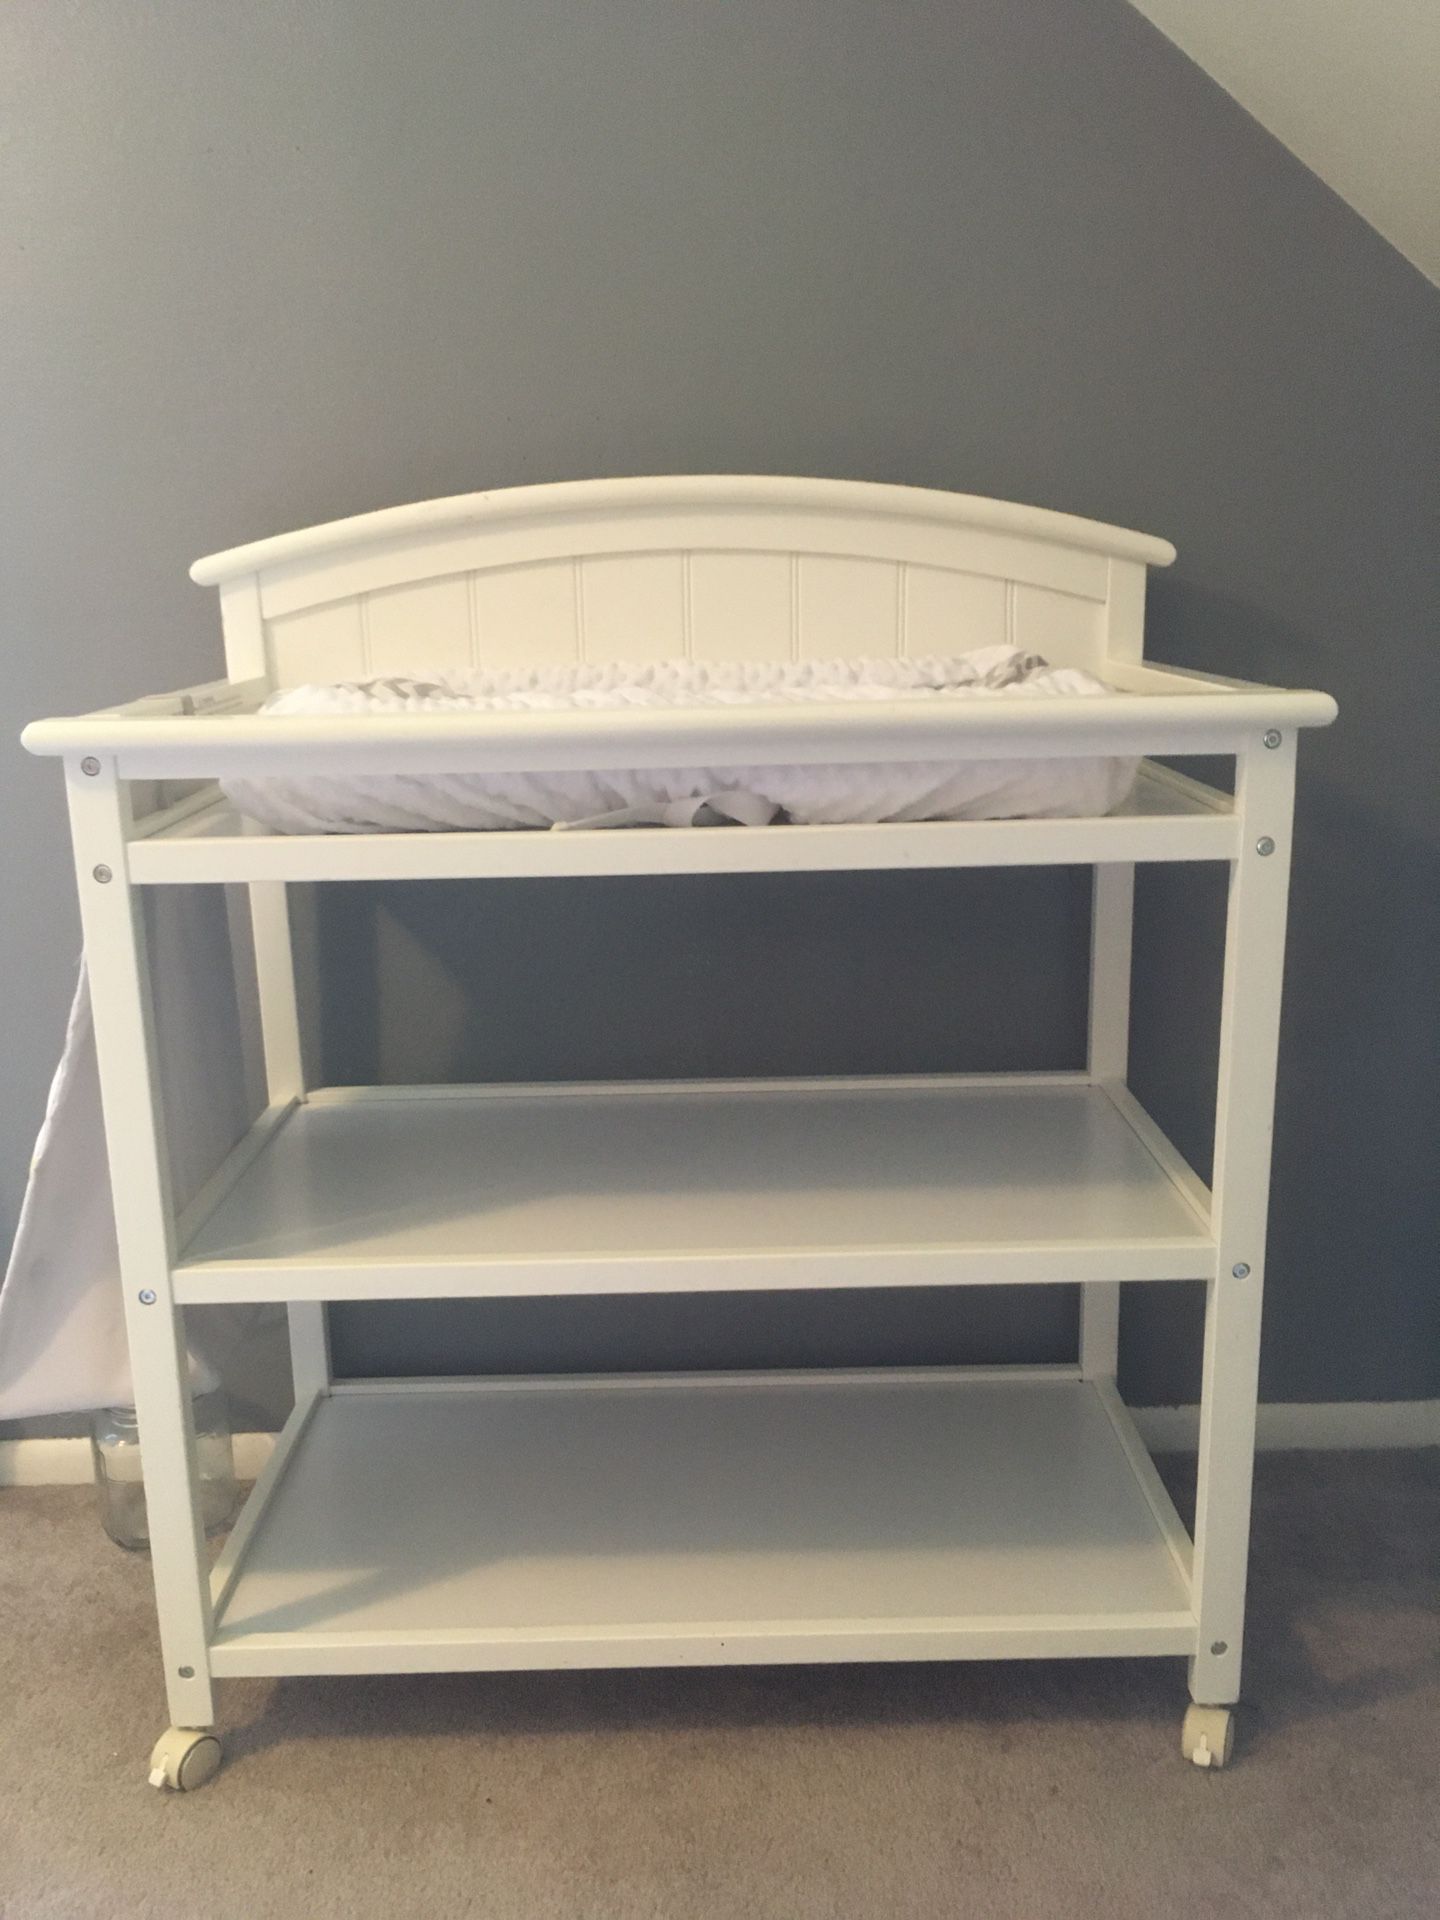 Infant Changing Table